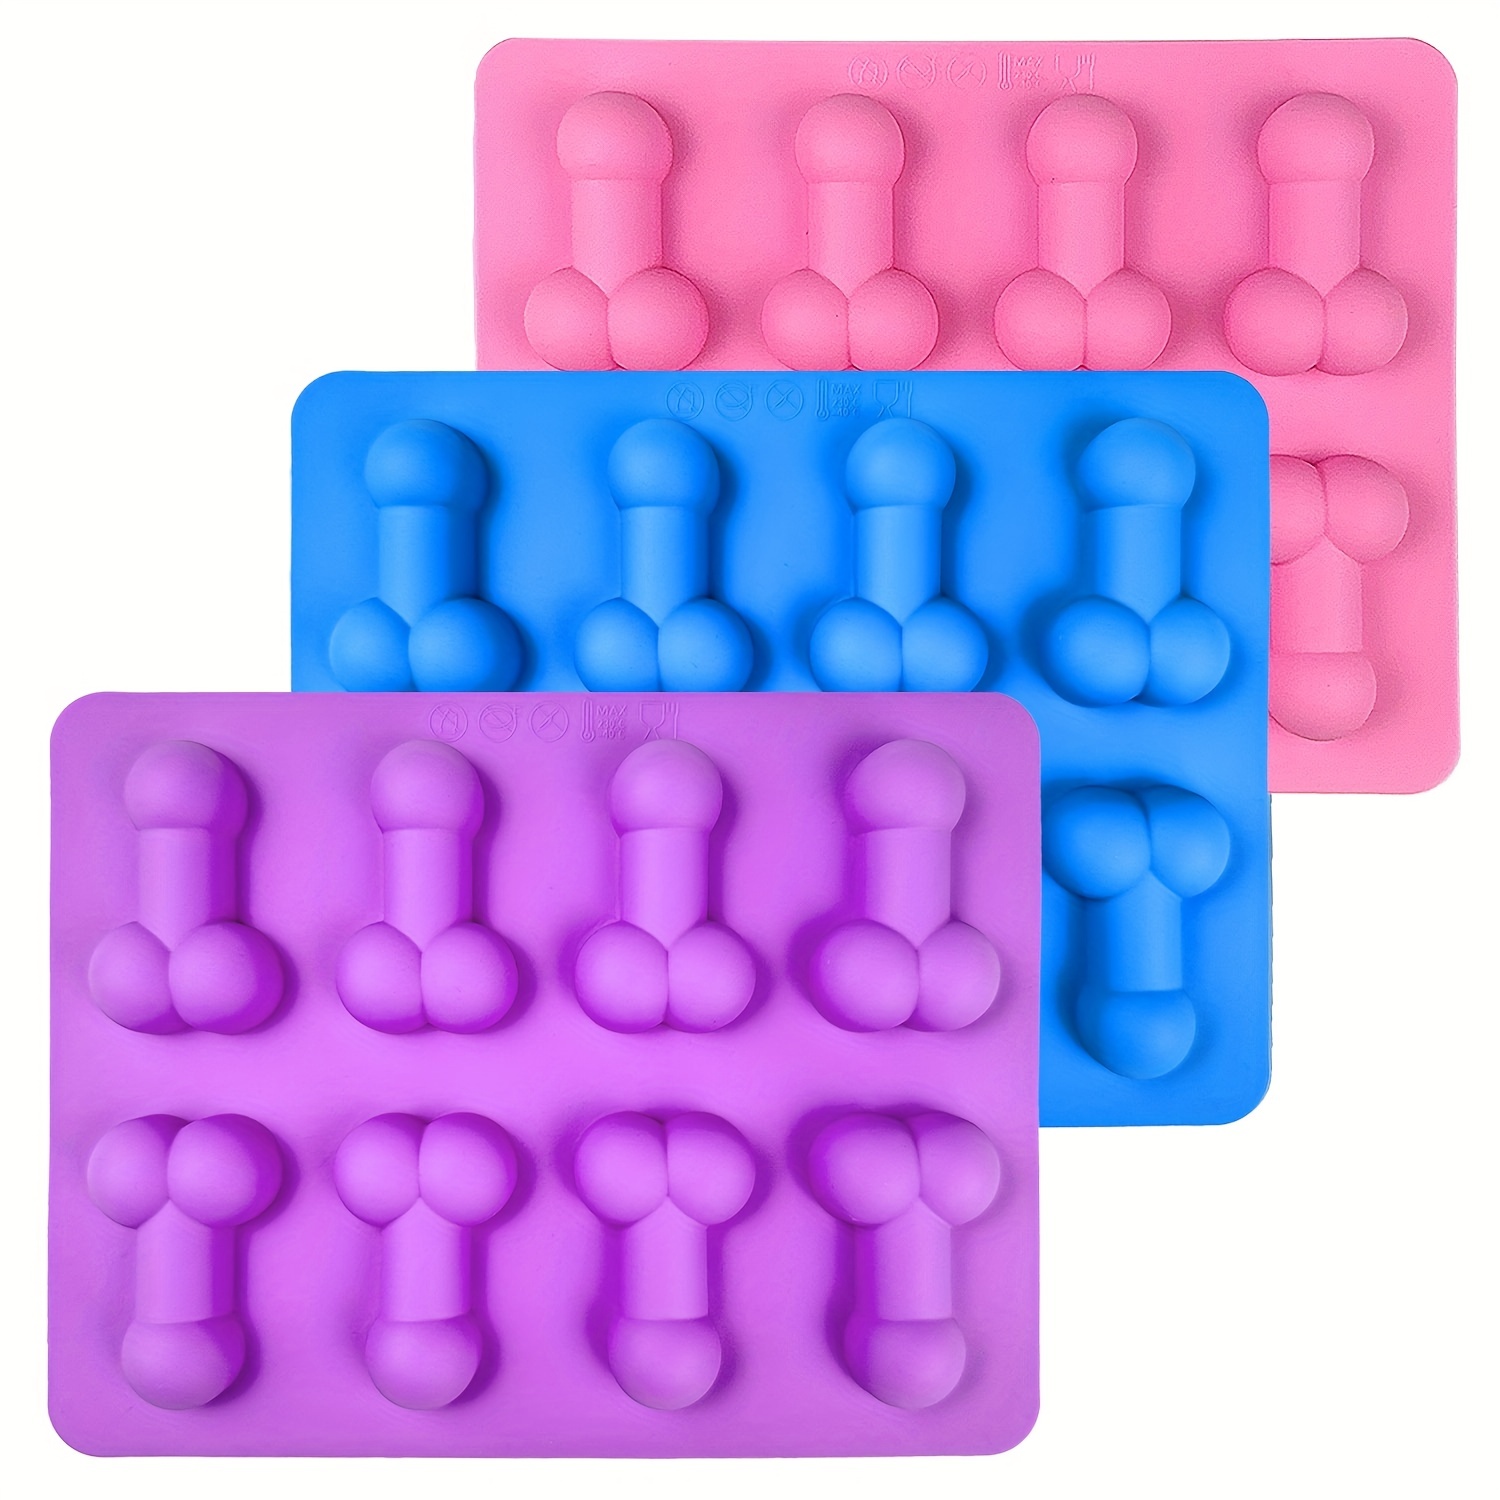 Silicone Penis Ice Mold,Ice Cube Tray,DIY Chocolate Molds Silicone,3D Sexy  Penis Mold Funny Novelty Jelly Ice Cube Mould,Suitable Making